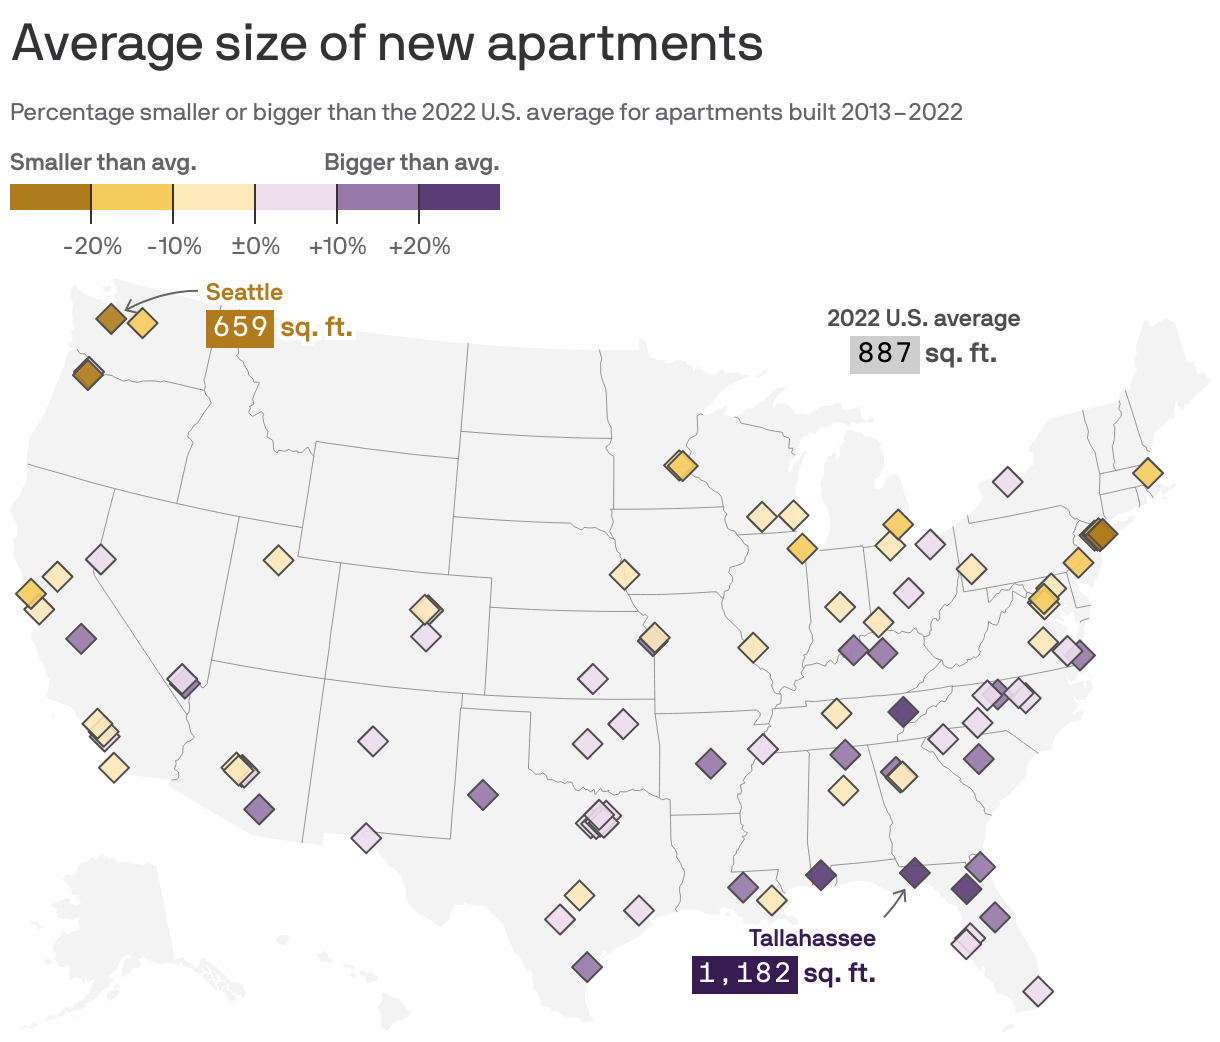 Average size of new apartments, 2022